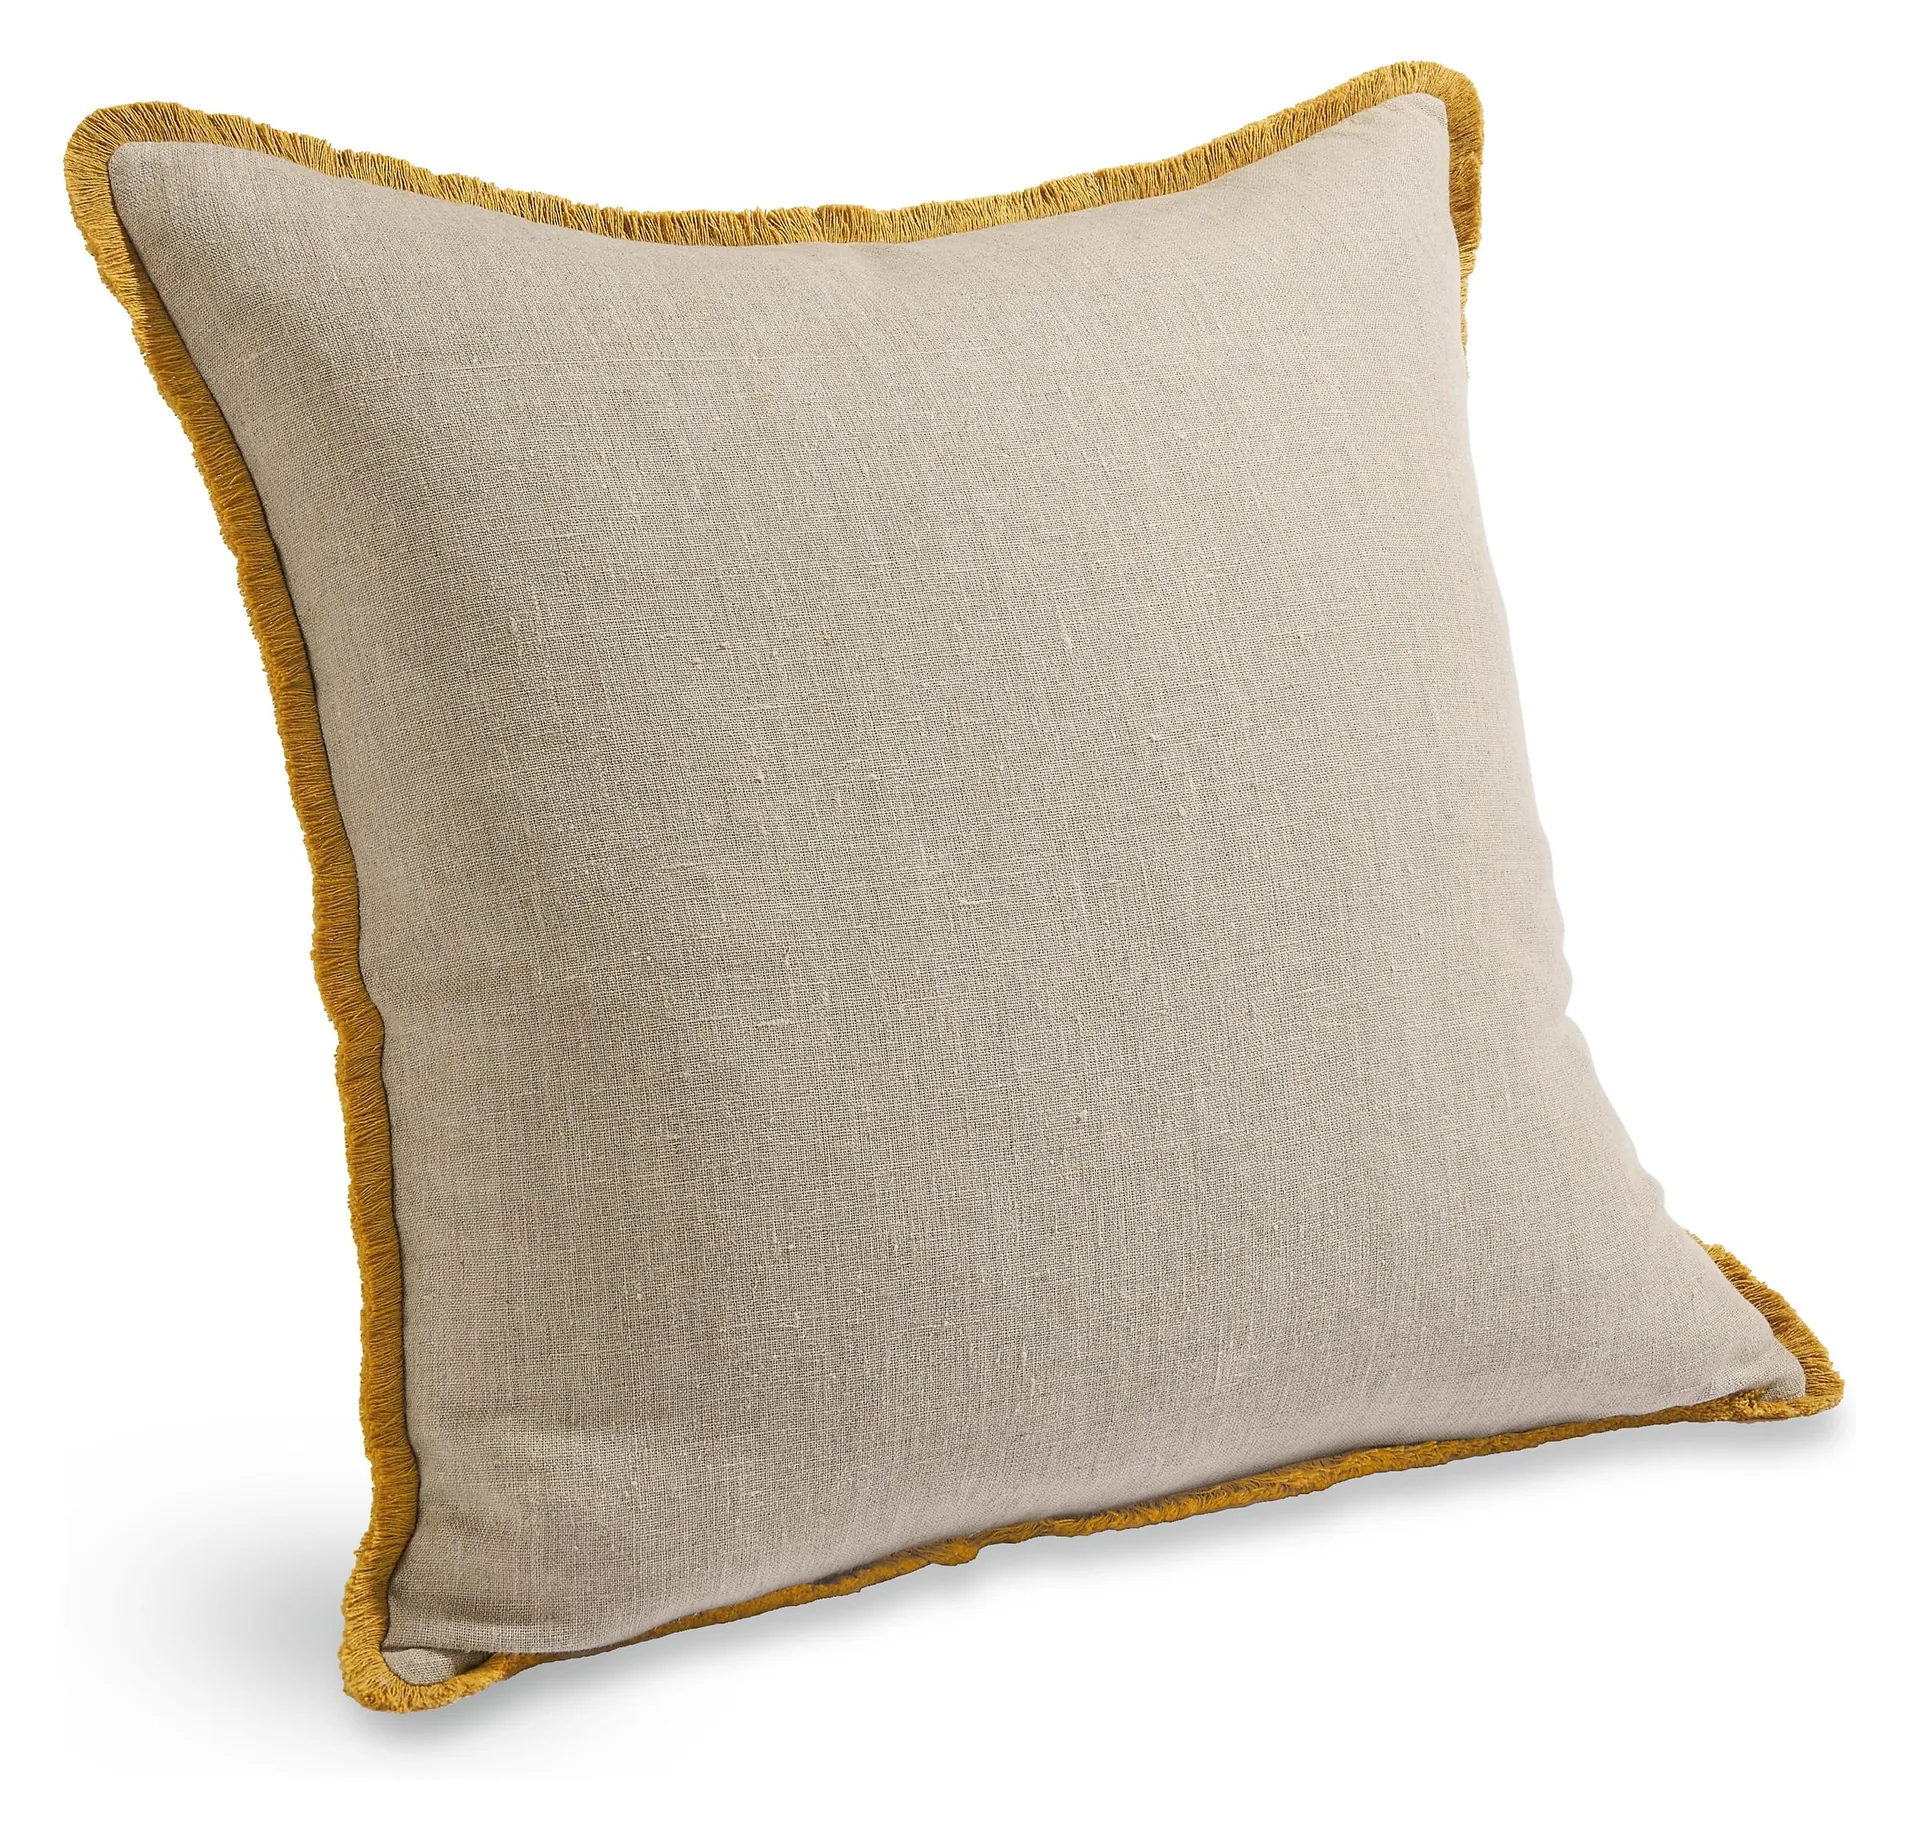 Marling 20w 20h Throw Pillow in Natural with Mustard Fringe